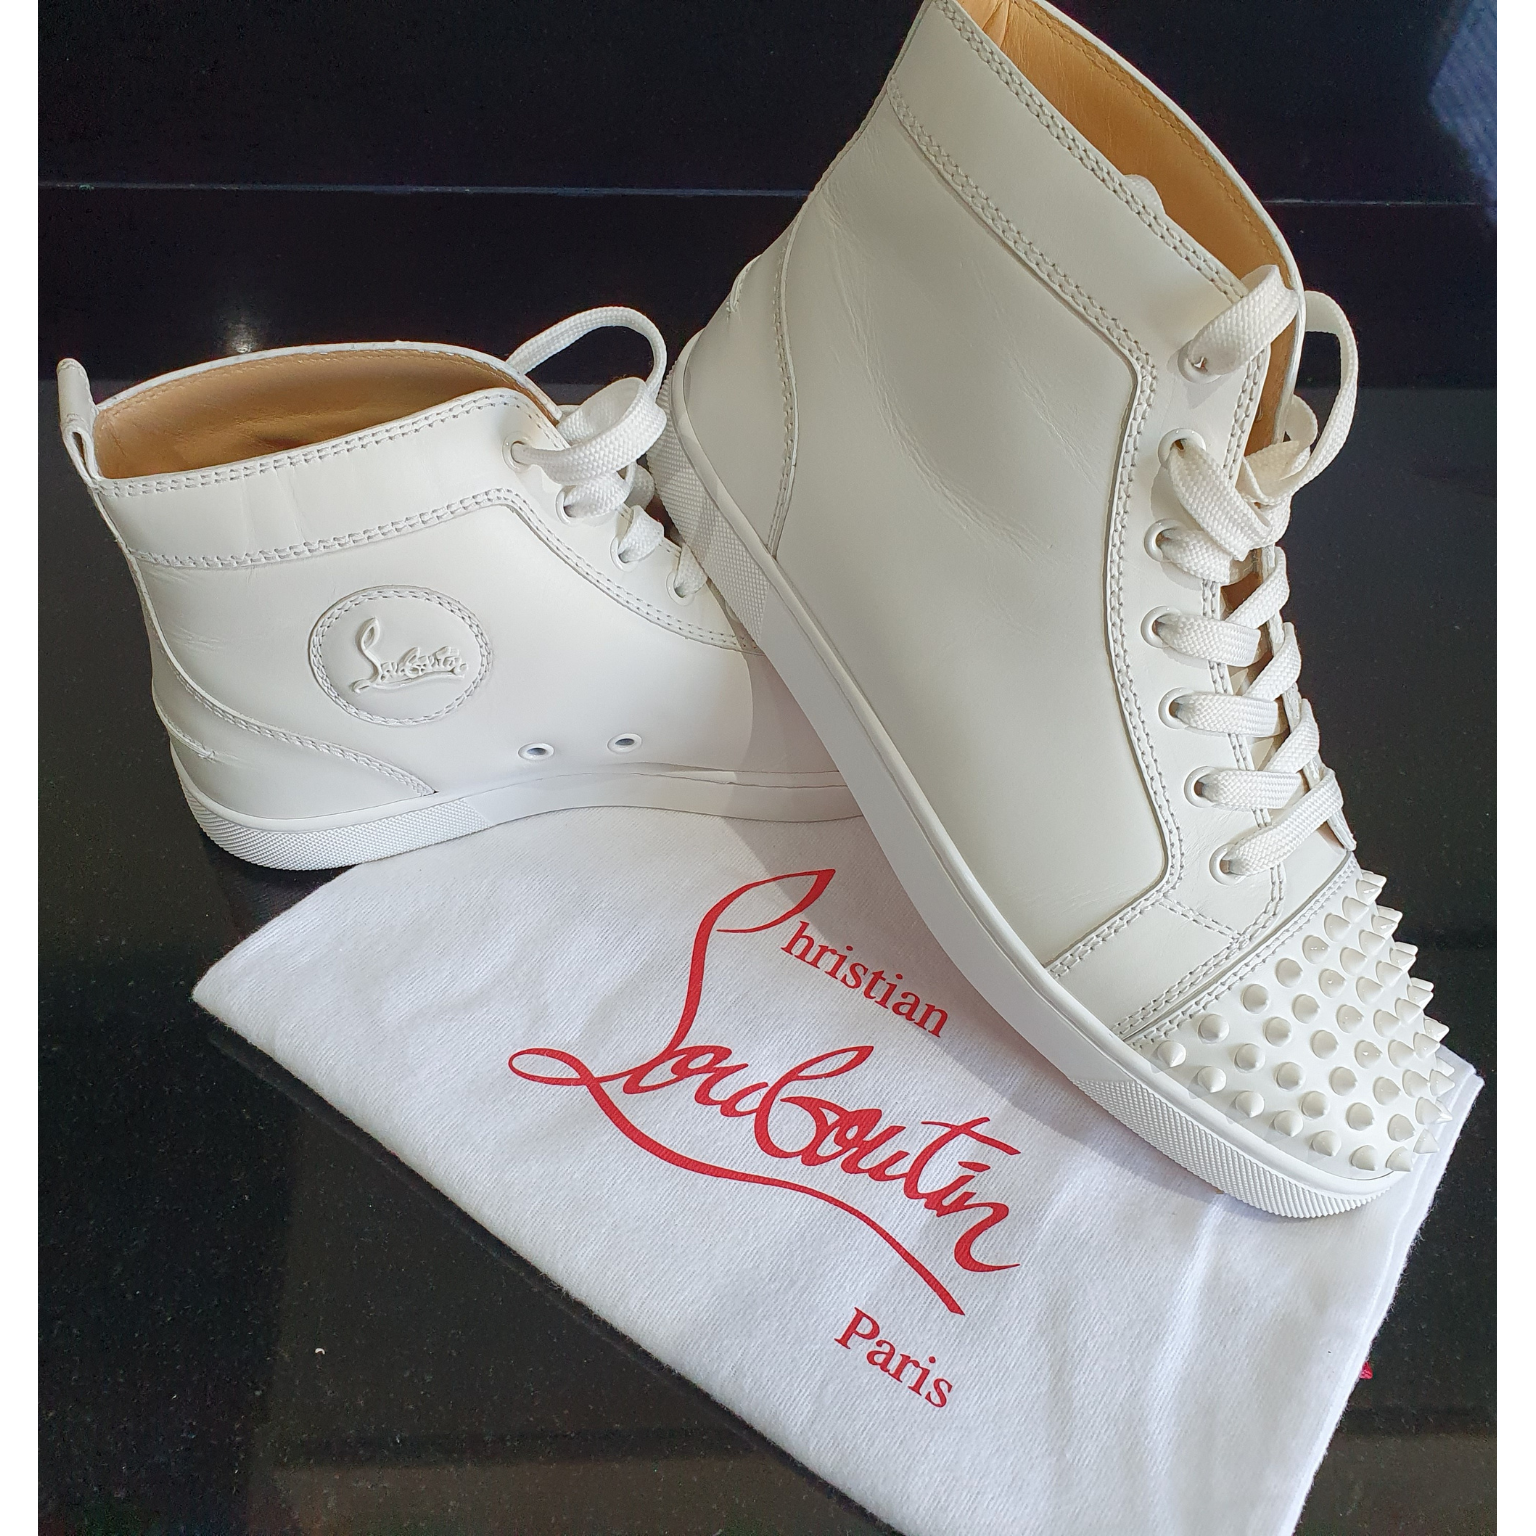 Christian Louboutin High Top Spiked Cap Toe Shoes